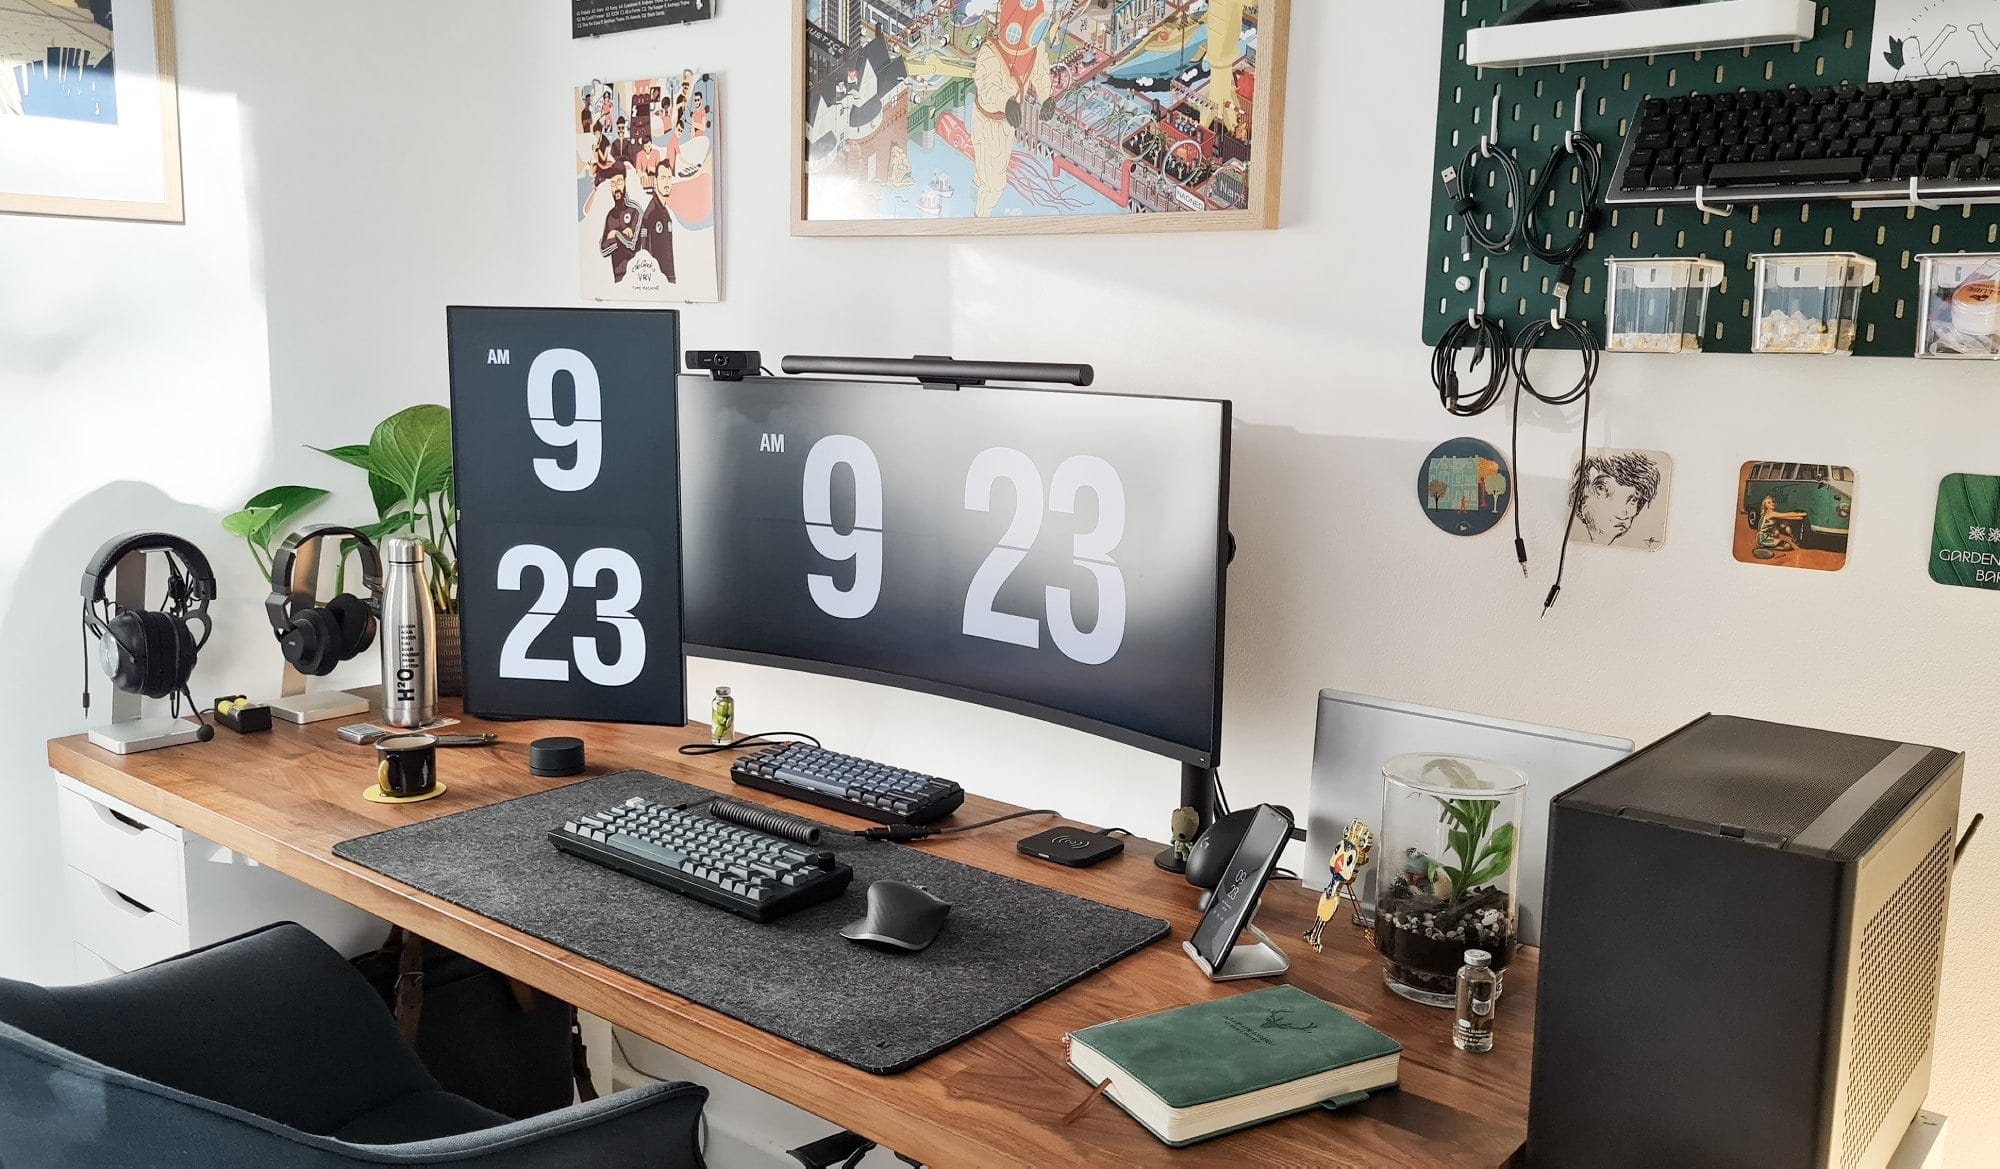 A well-organised desk setup featuring dual monitors displaying a large clock, two mechanical keyboards, and a Logitech mouse on a grey felt desk mat